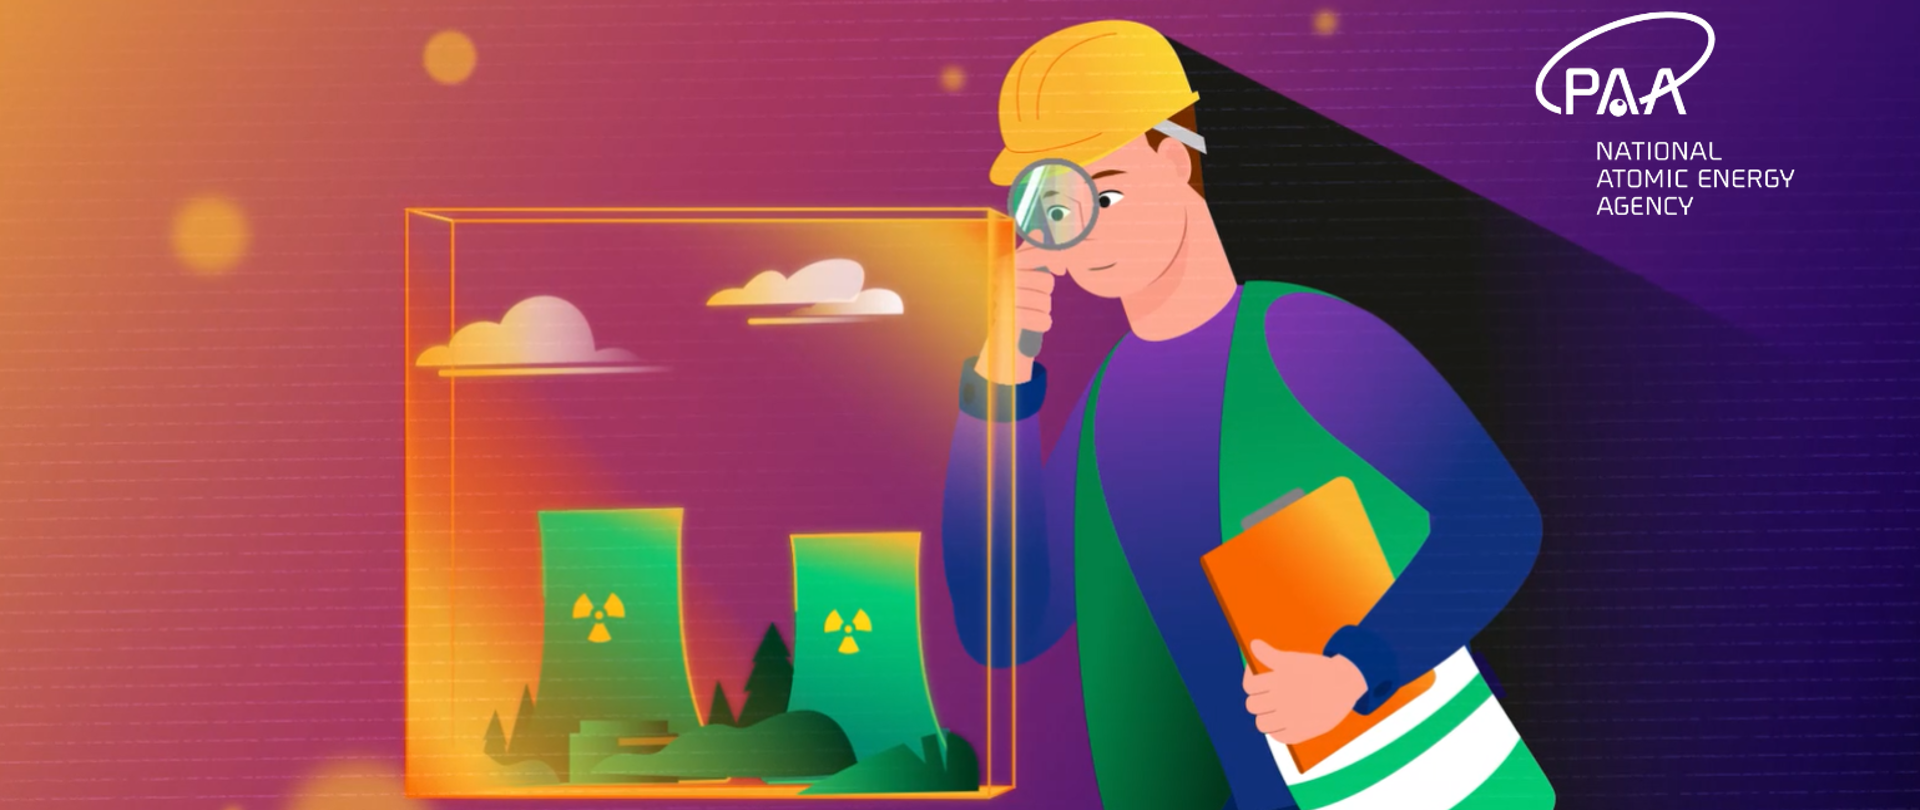 Graphic - a nuclear regulatory inspector with a protective helmet and a vest looks through a magnifying glass at a symbolic visualization of a nuclear power plant enclosed in a cube. In the inspector's other hand there is a notebook